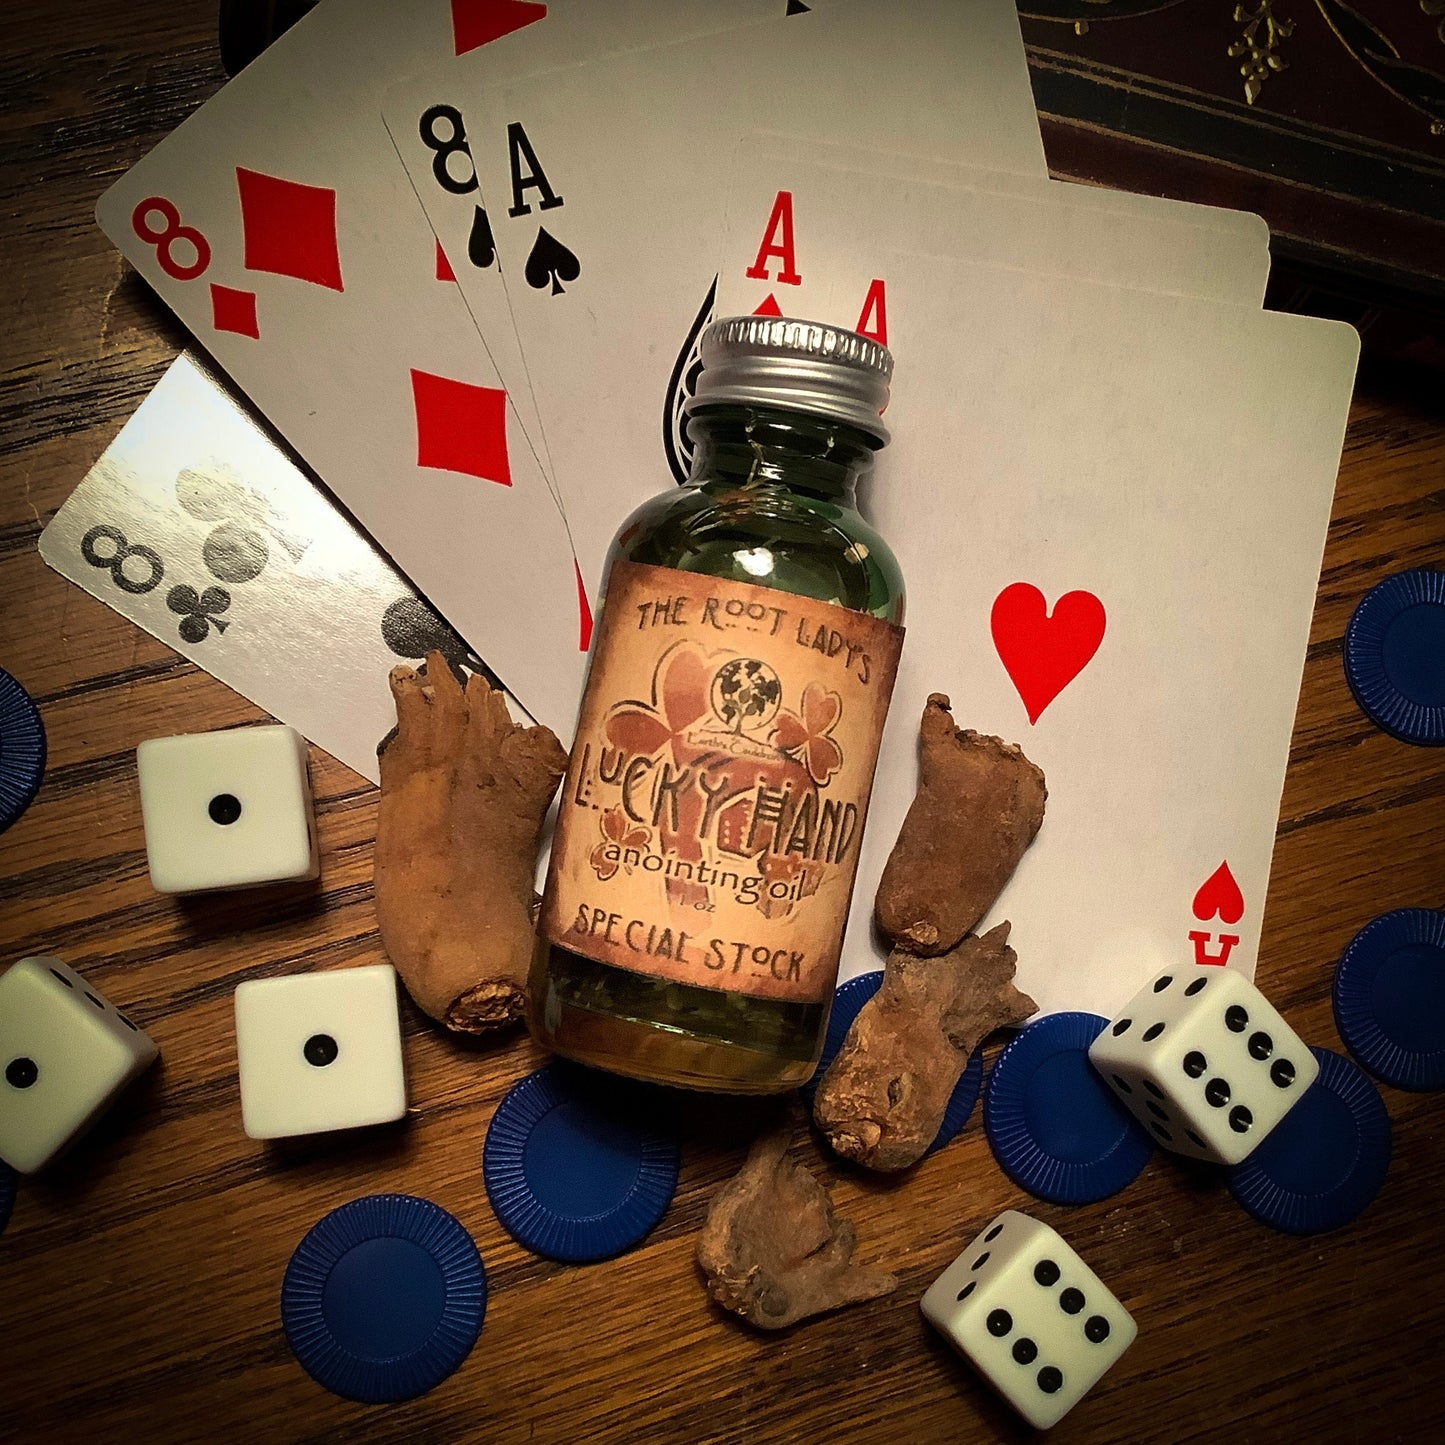 Lucky Hand ~ Luck & Chance ~ Spell and Anointing Oil